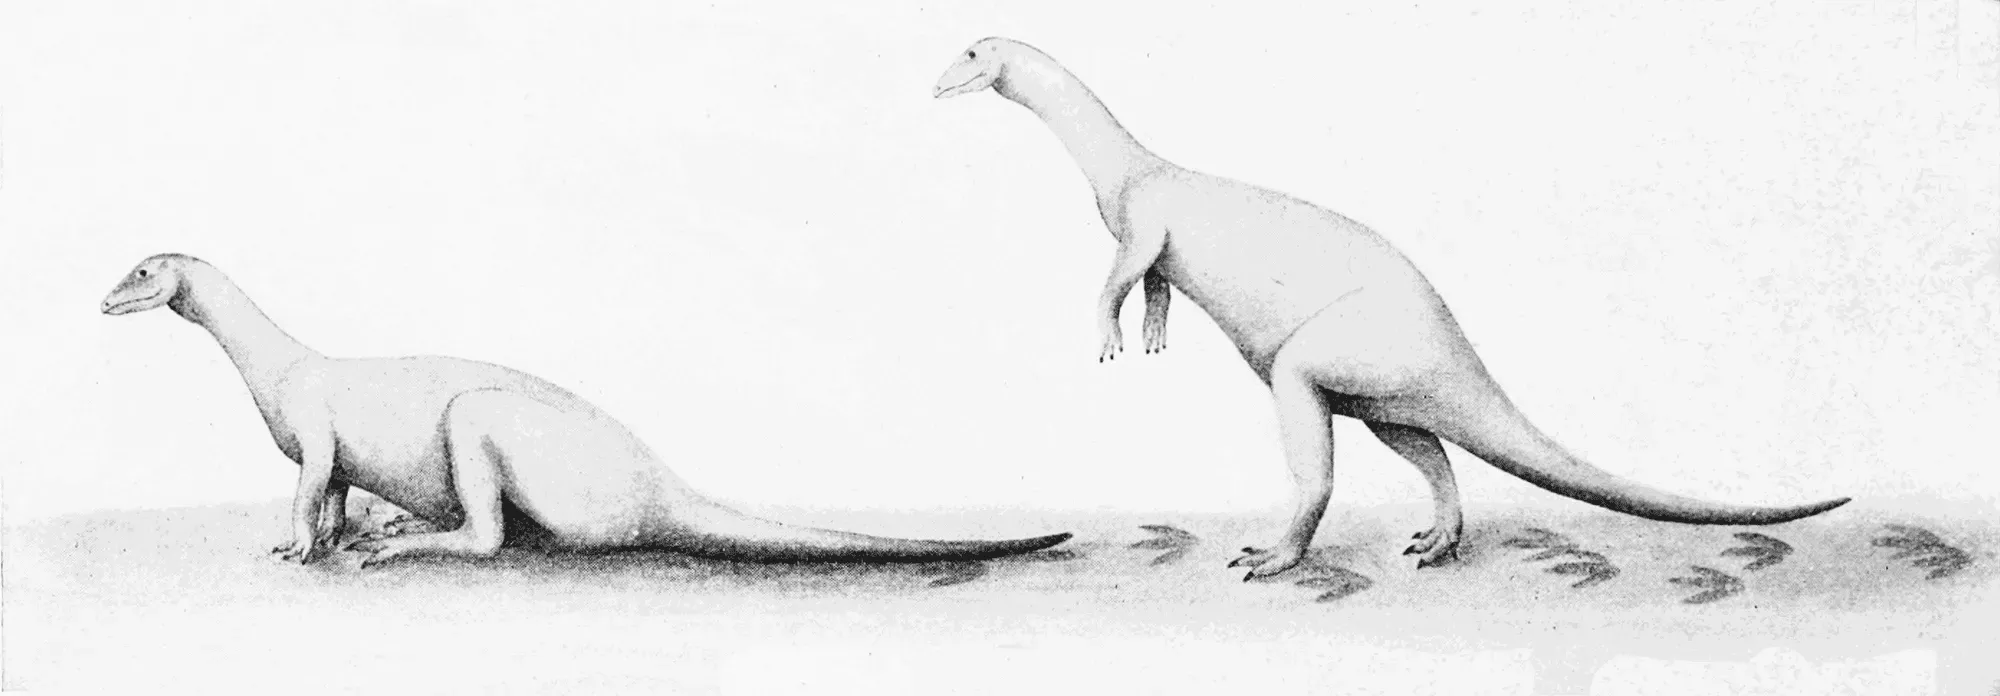 *We've been unable to source an image of Corythoraptor and have used a sketch of a herbivorous dinosaur instead. If you are able to provide us with a royalty-free image of Corythoraptor, we would be happy to credit you. Please contact us at hello@kidadl.com.  The Corythoraptor was practically toothless.